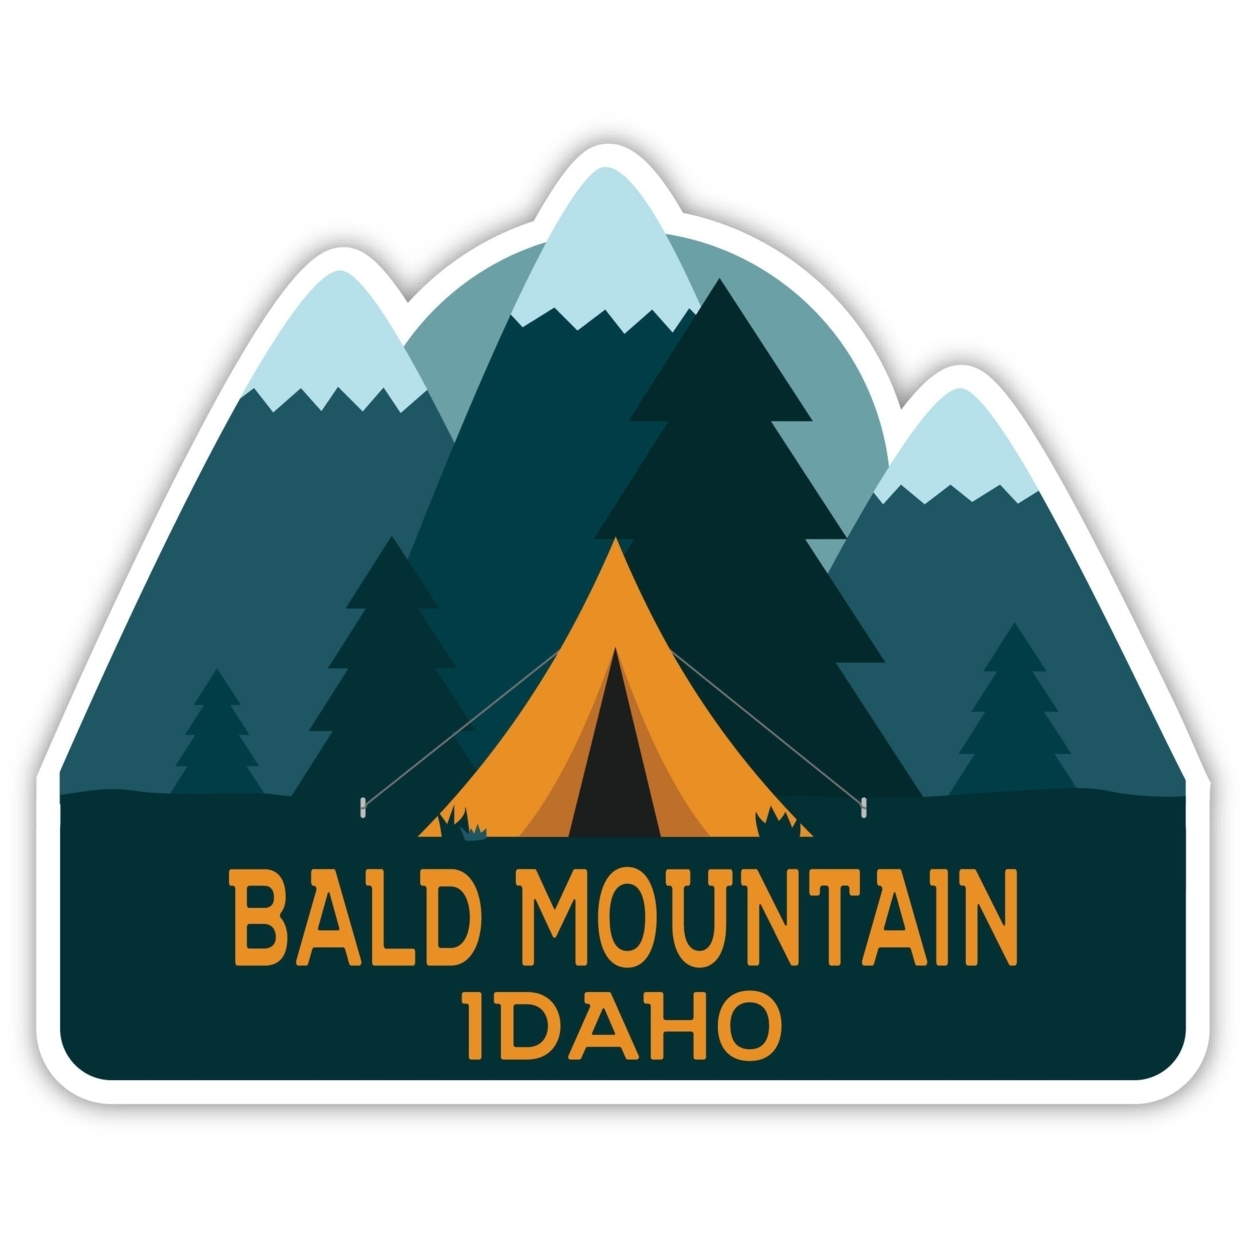 Bald Mountain Idaho Souvenir Decorative Stickers (Choose Theme And Size) - 4-Pack, 12-Inch, Tent